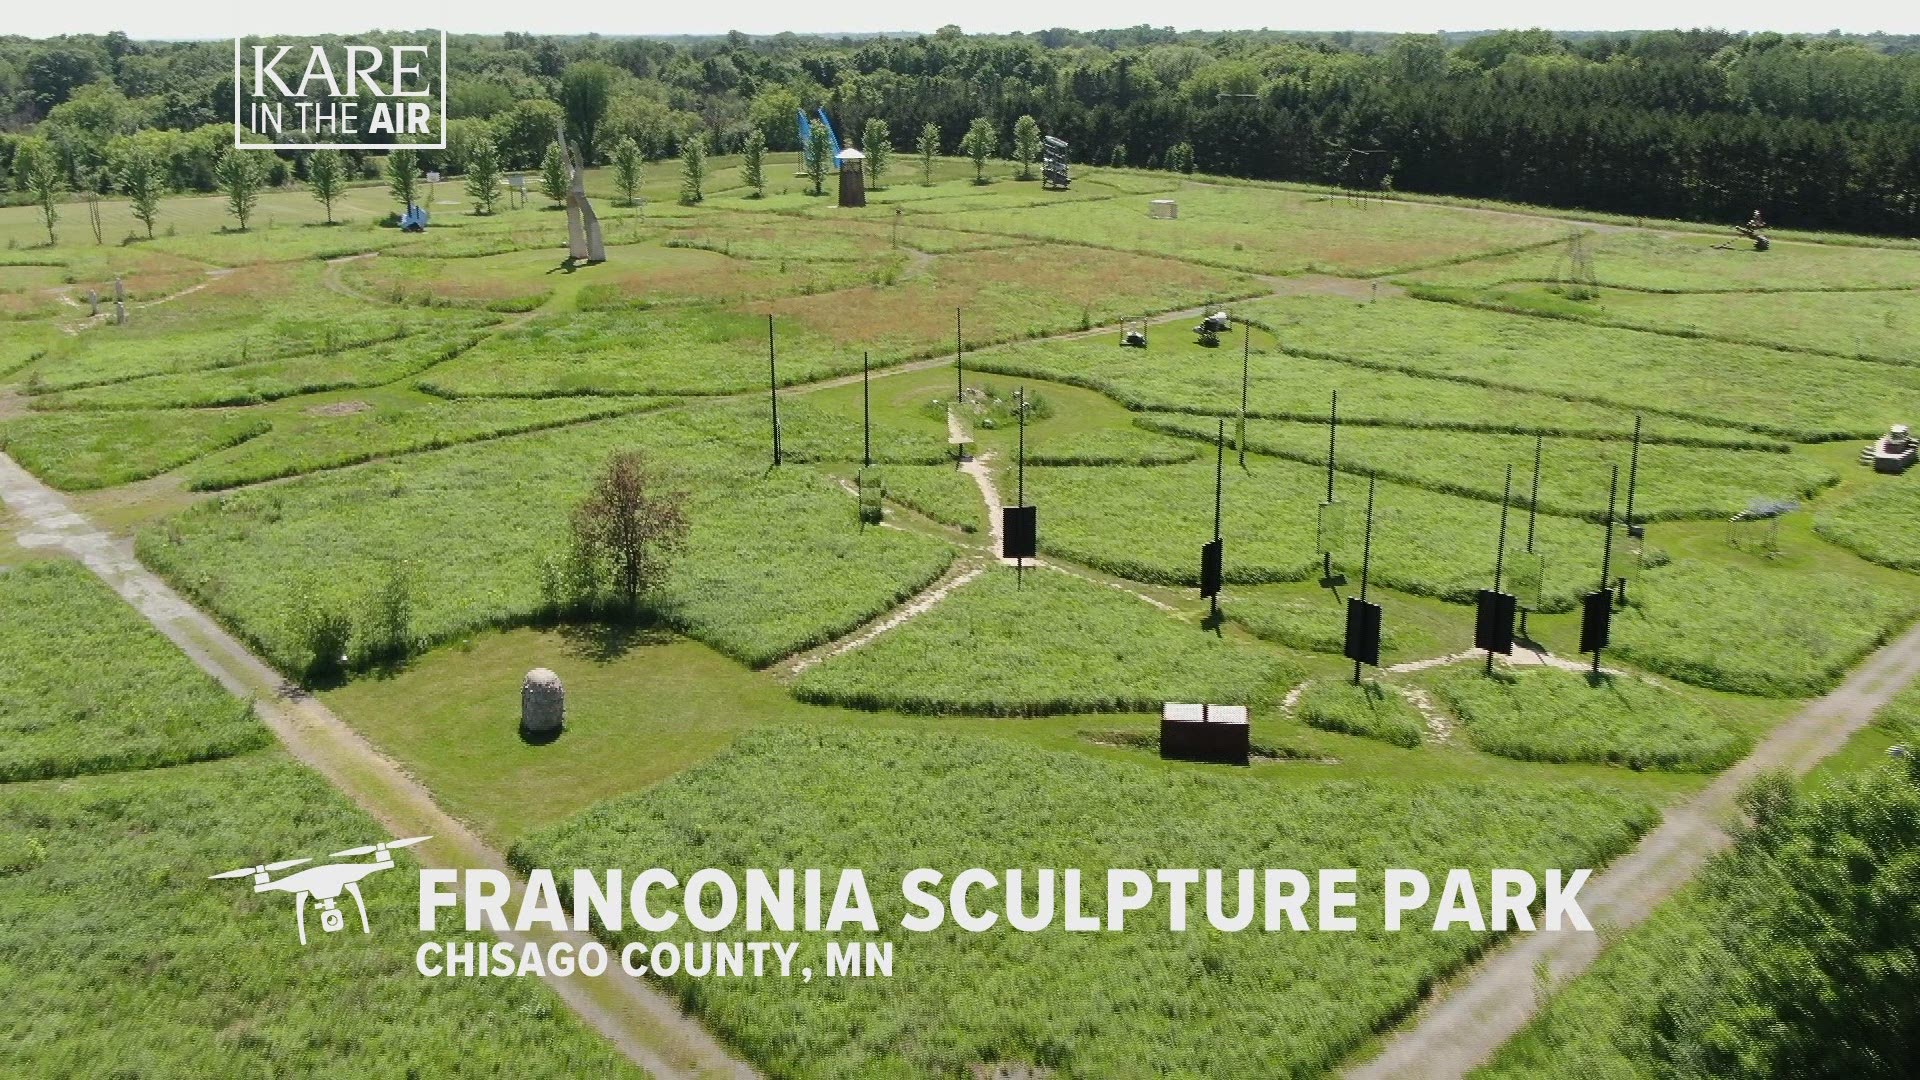 The "outdoor museum" offers around 50 acres of sculpture-studded open space. KARE 11 got a drone's-eye view!